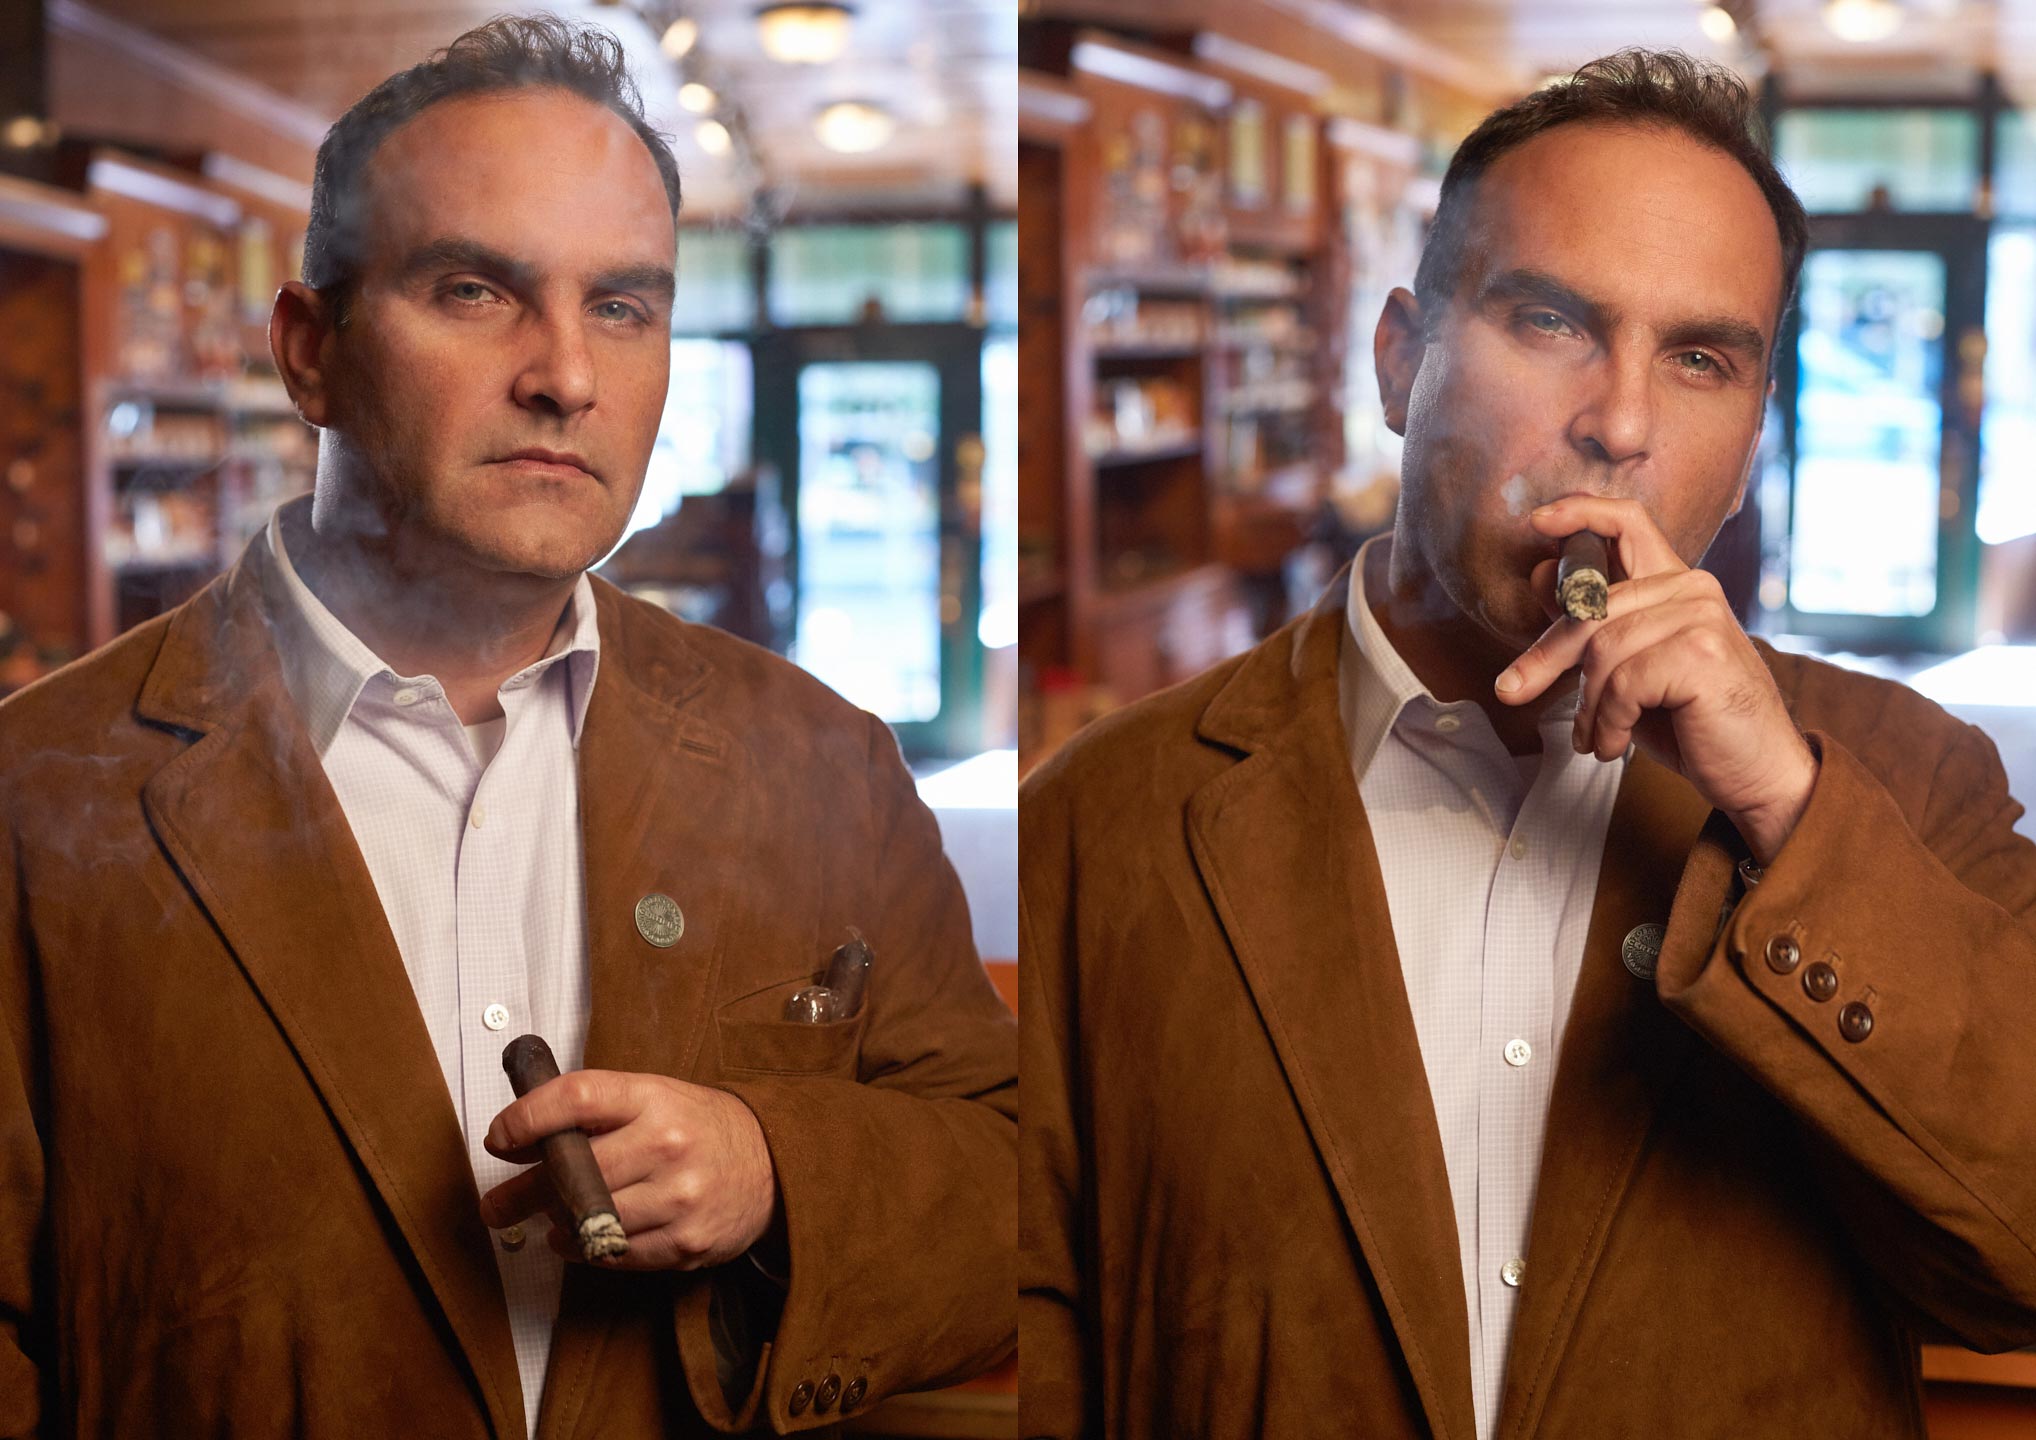 Jorge Armenteros, additional poses from the cover setup - also shot in the humidor. Princeton, NJ. July, 2015.